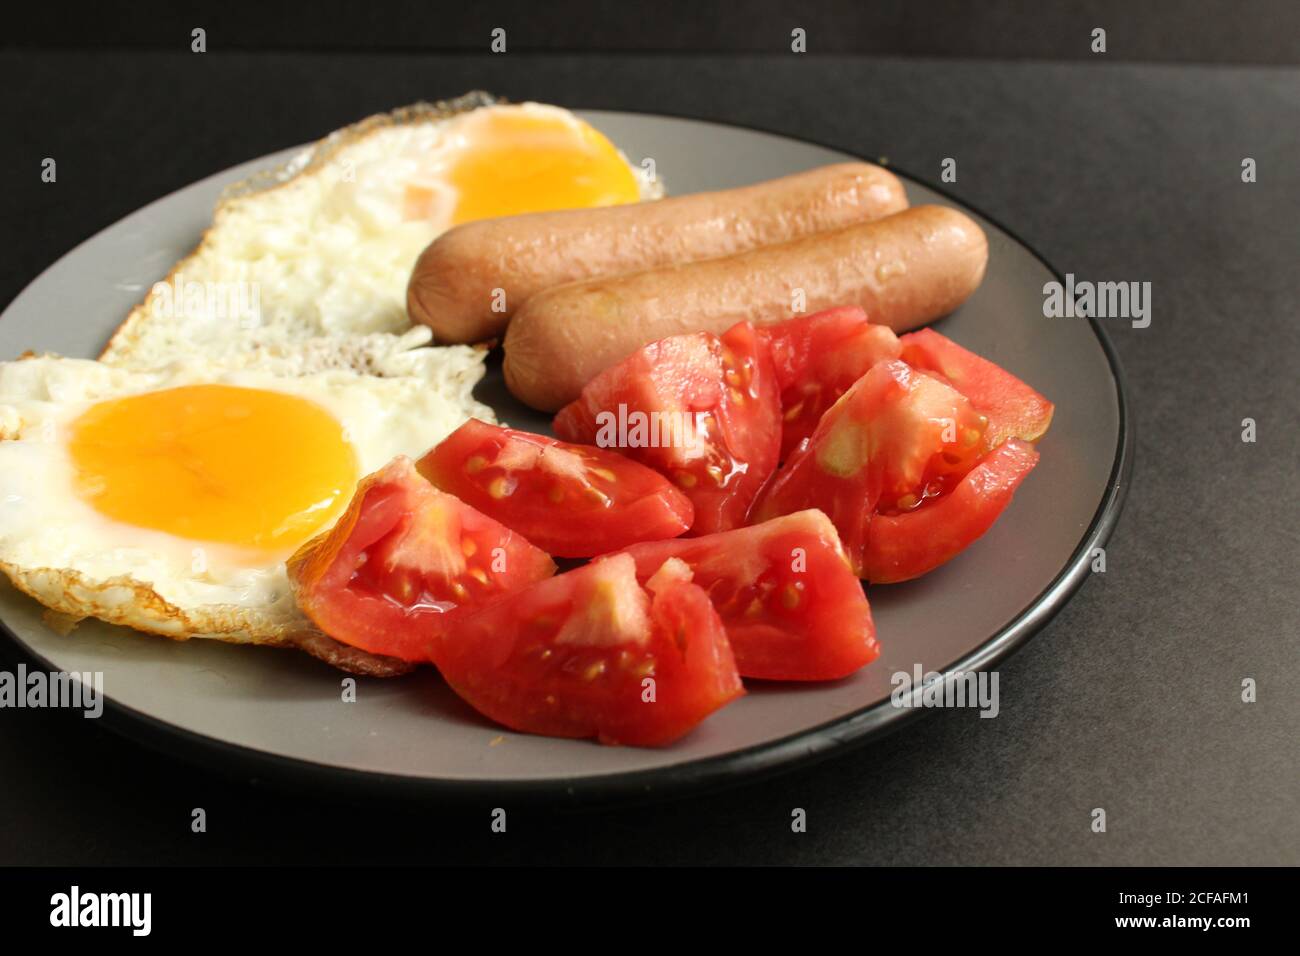 traditional English European Breakfast eggs sausage and salad vegetables red tomatoes on a gray plate on a black background close up side view Stock Photo